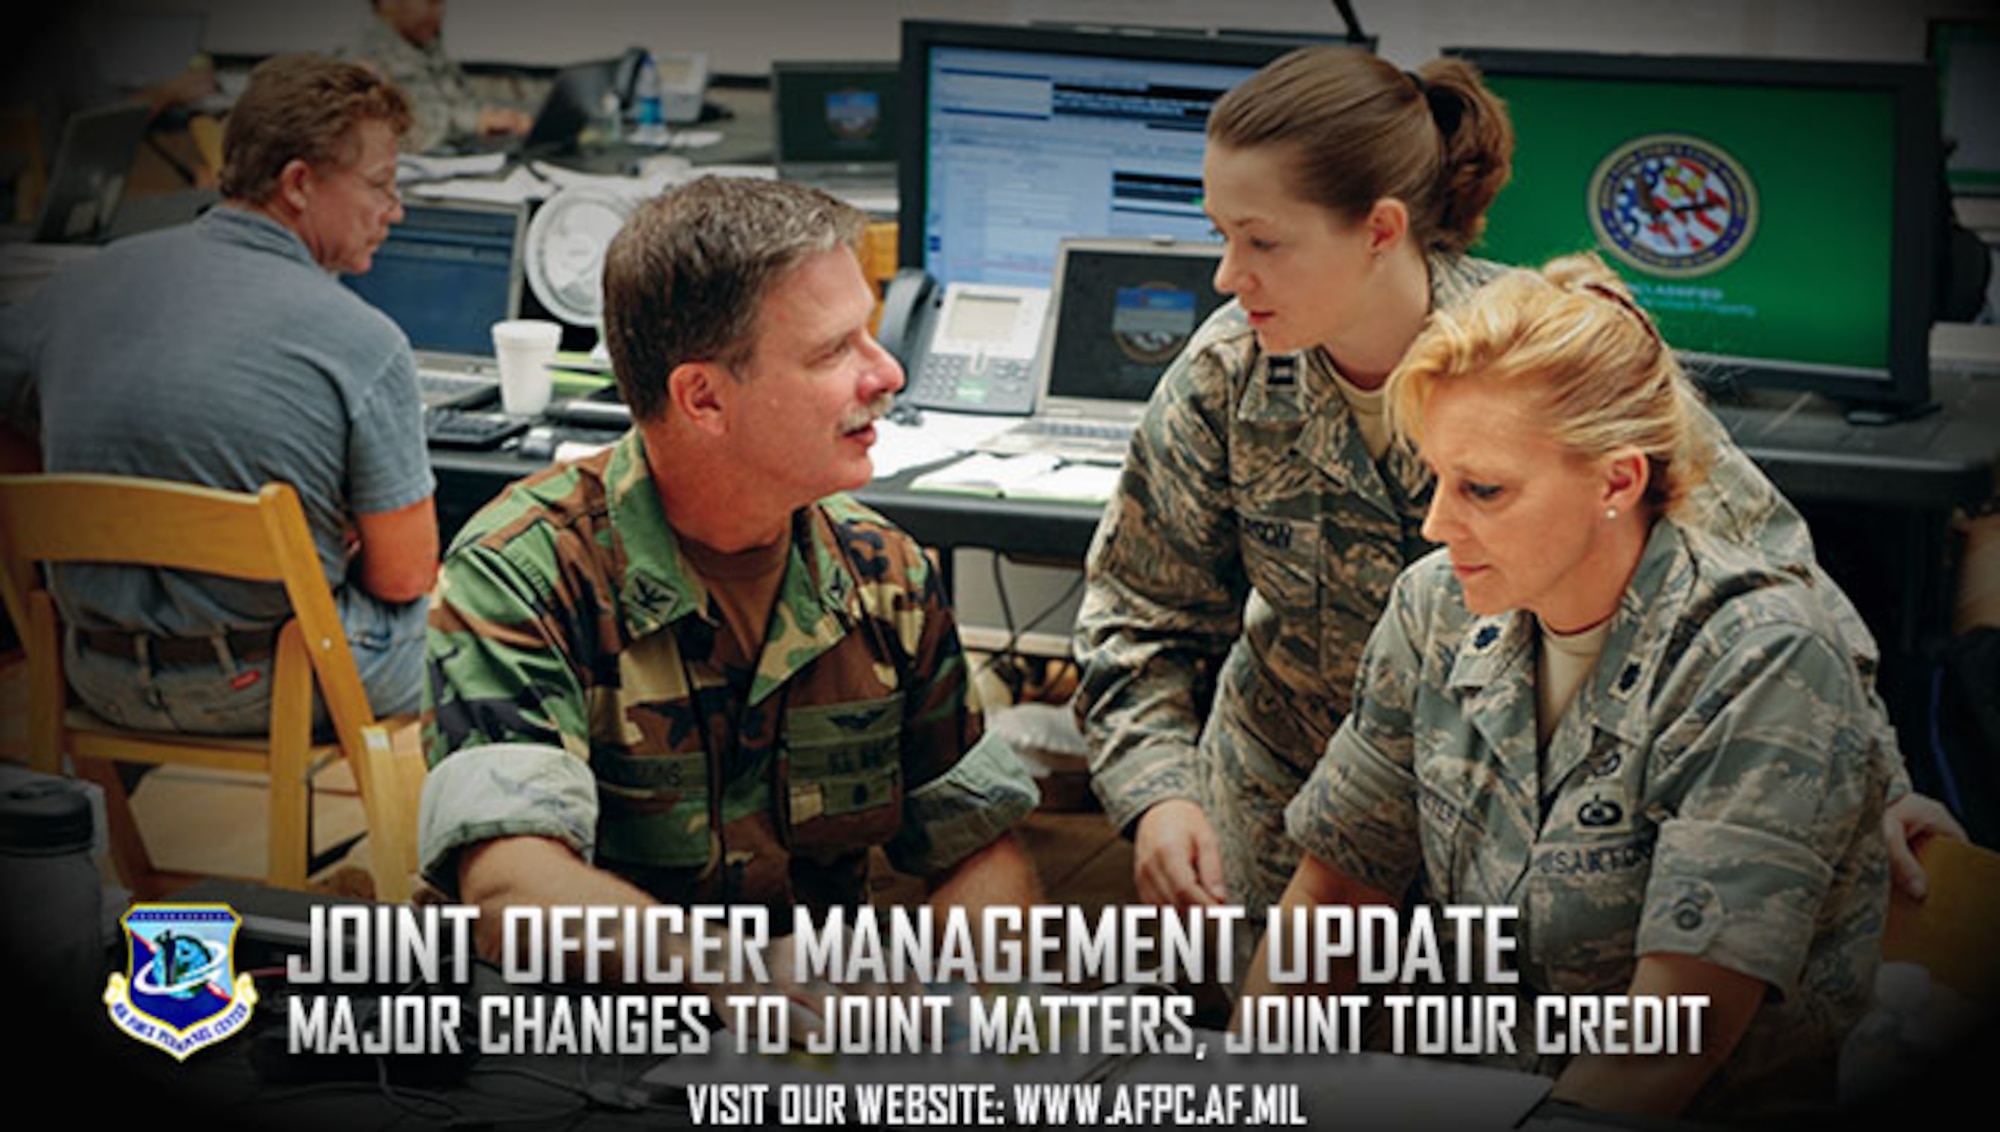 Two major joint officer management laws affecting active and reserve component Air Force officers have recently changed. The definition of “joint matters” has expanded and the authorized length of a joint tour without waiver has shortened. (U.S. Air Force courtesy graphic)